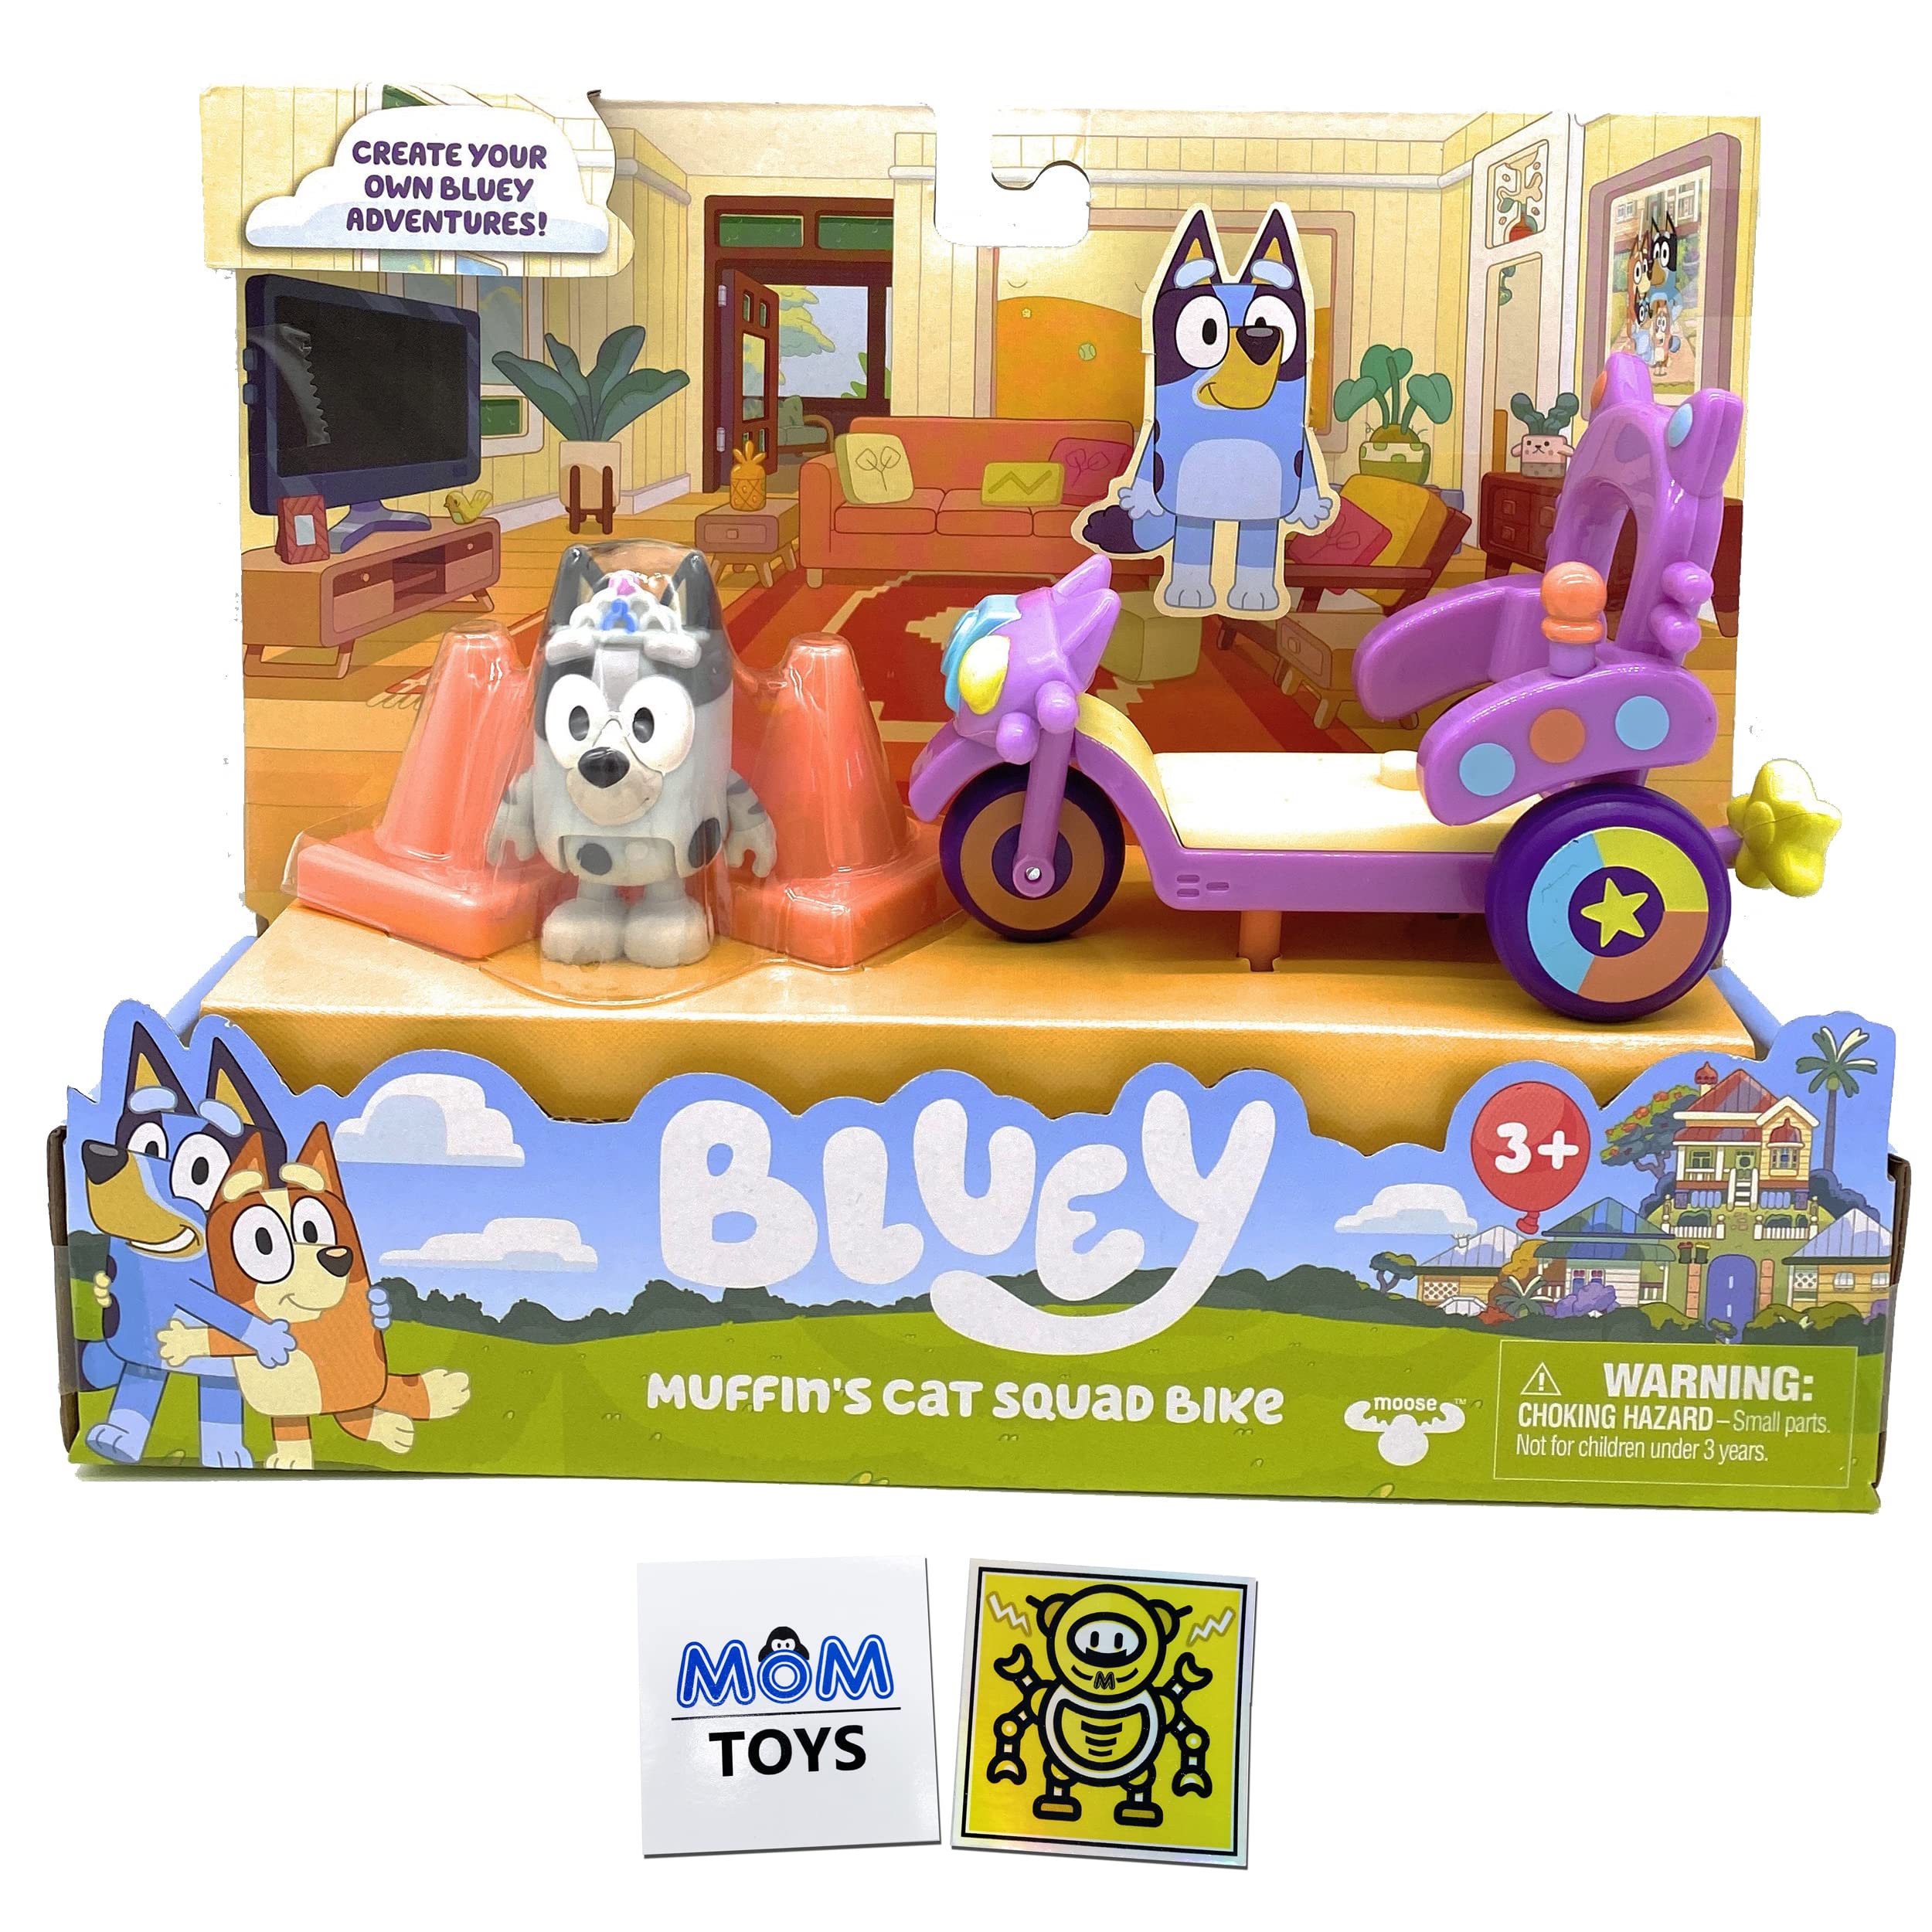 MOTIONRUSH Bluey Toys Vehicle Muffin Cat Squad 3 Wheel Bike and 2.5 Muffin Articulated Figure - Bicycle Bundle with 2 My Out